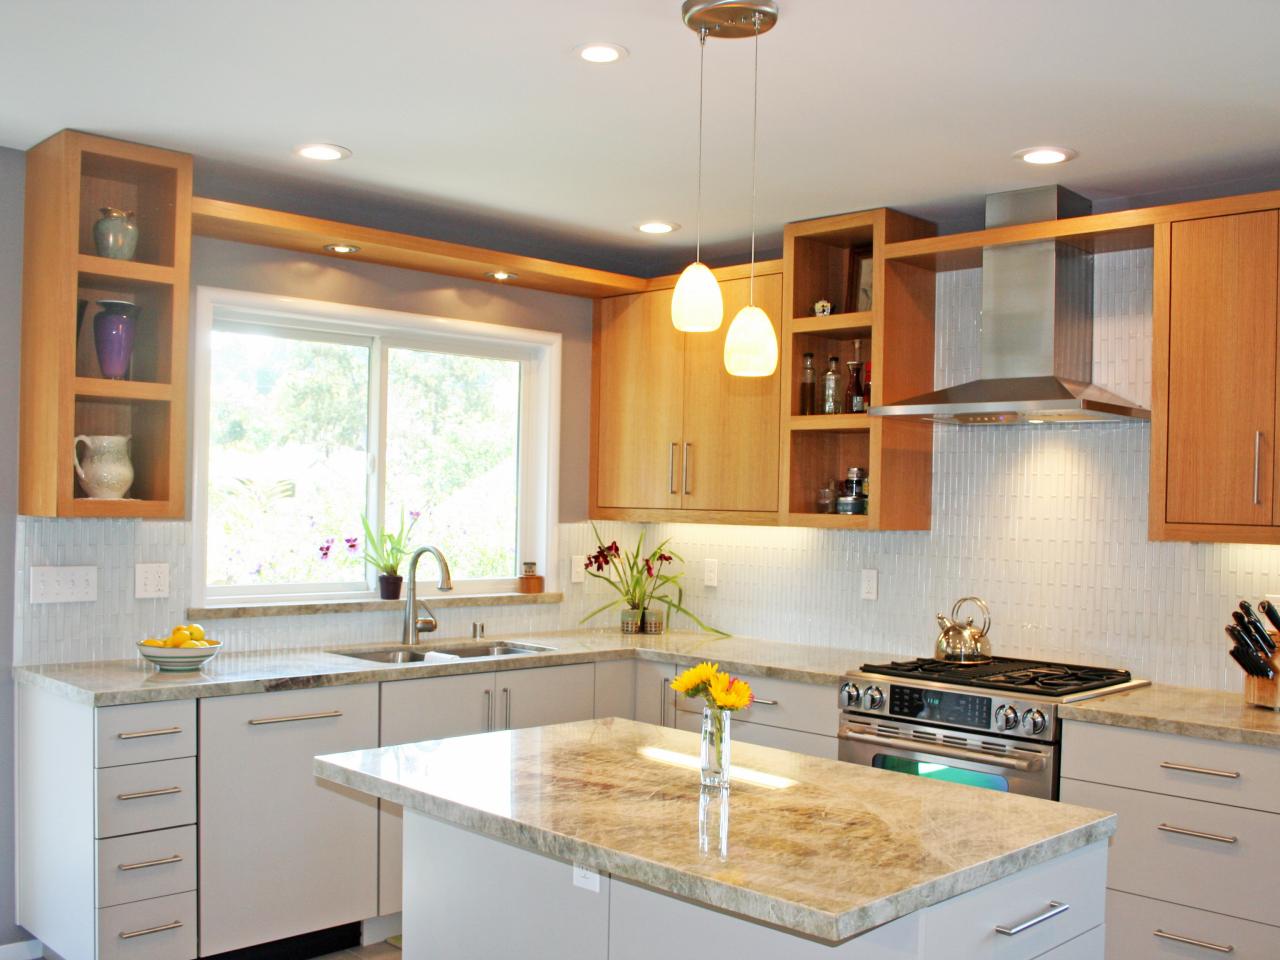 Creative fitted kitchen cabinet lighting